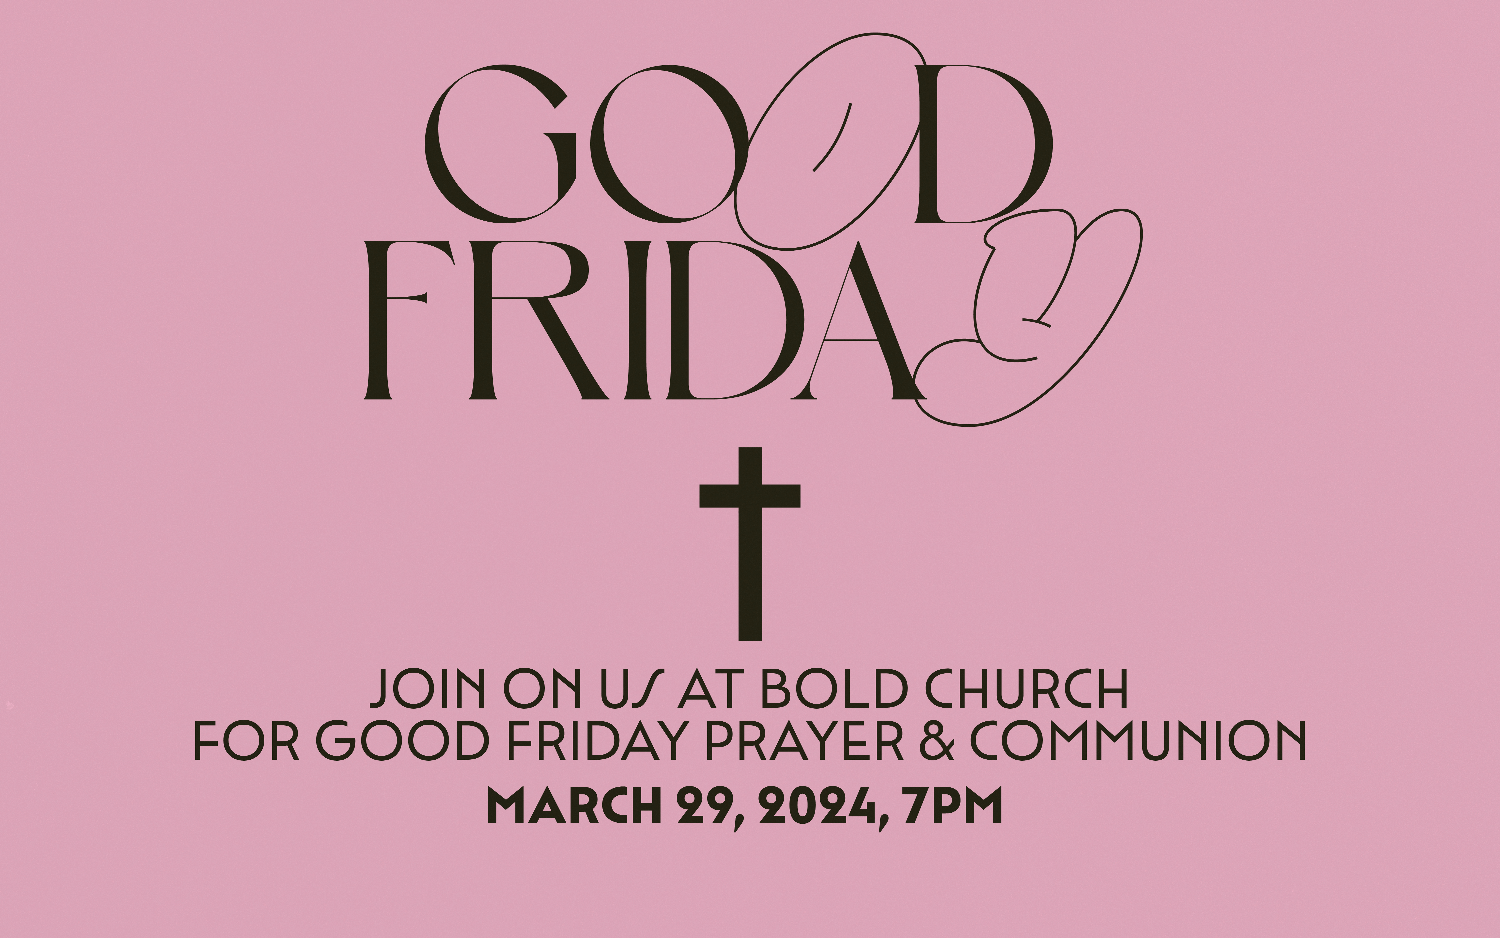 join us for good friday prayer and communion, mar 29 7pm